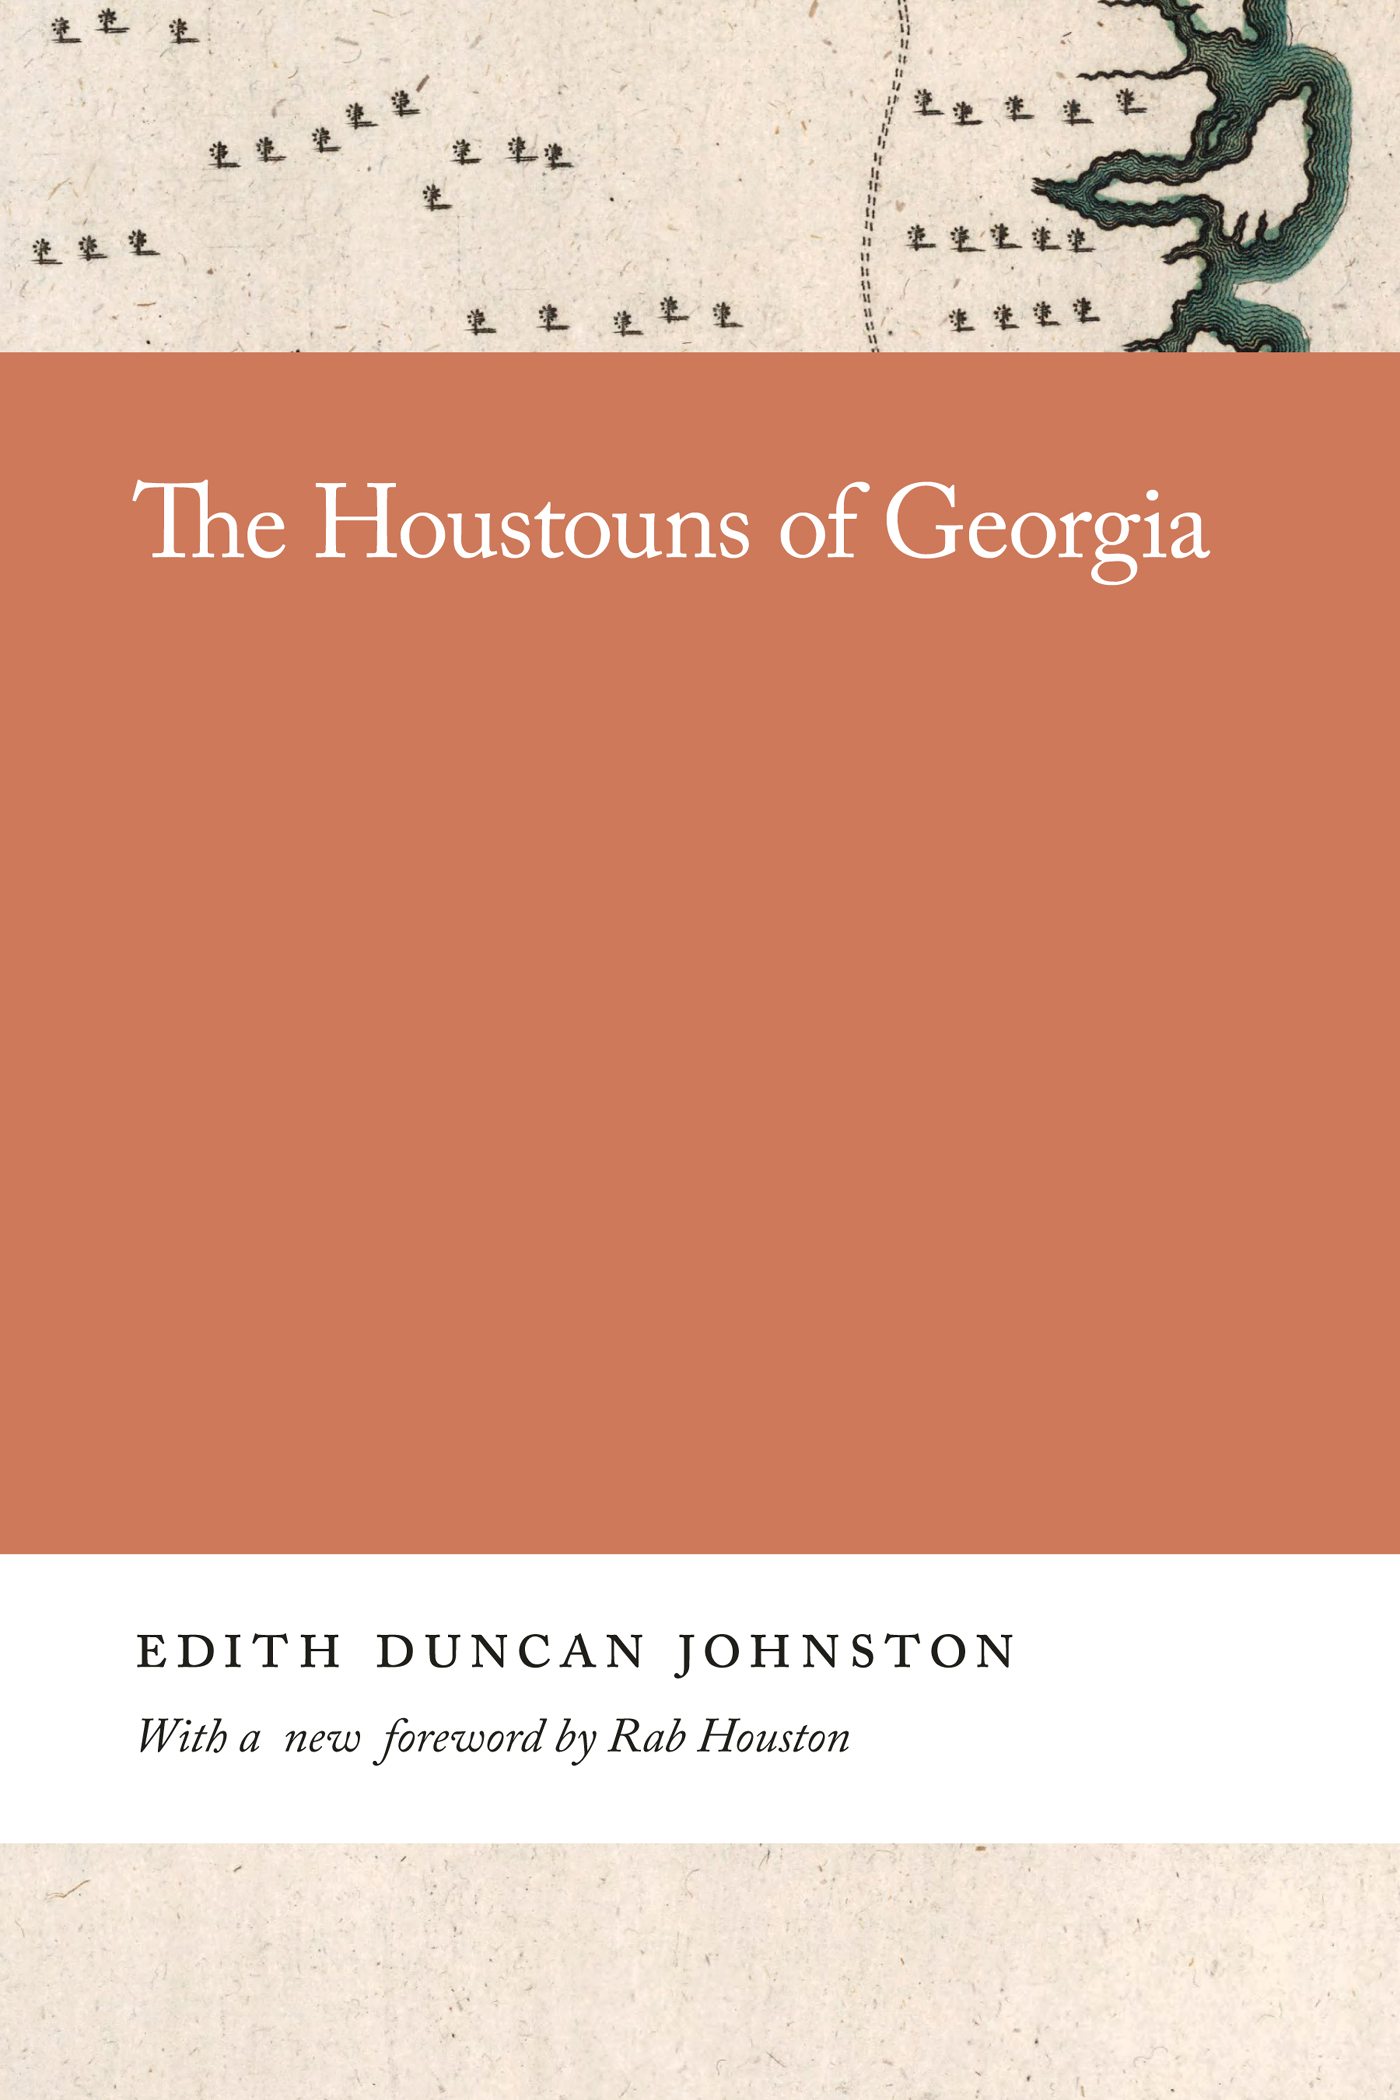 Cover page of the book “The Houstouns of Georgia.”